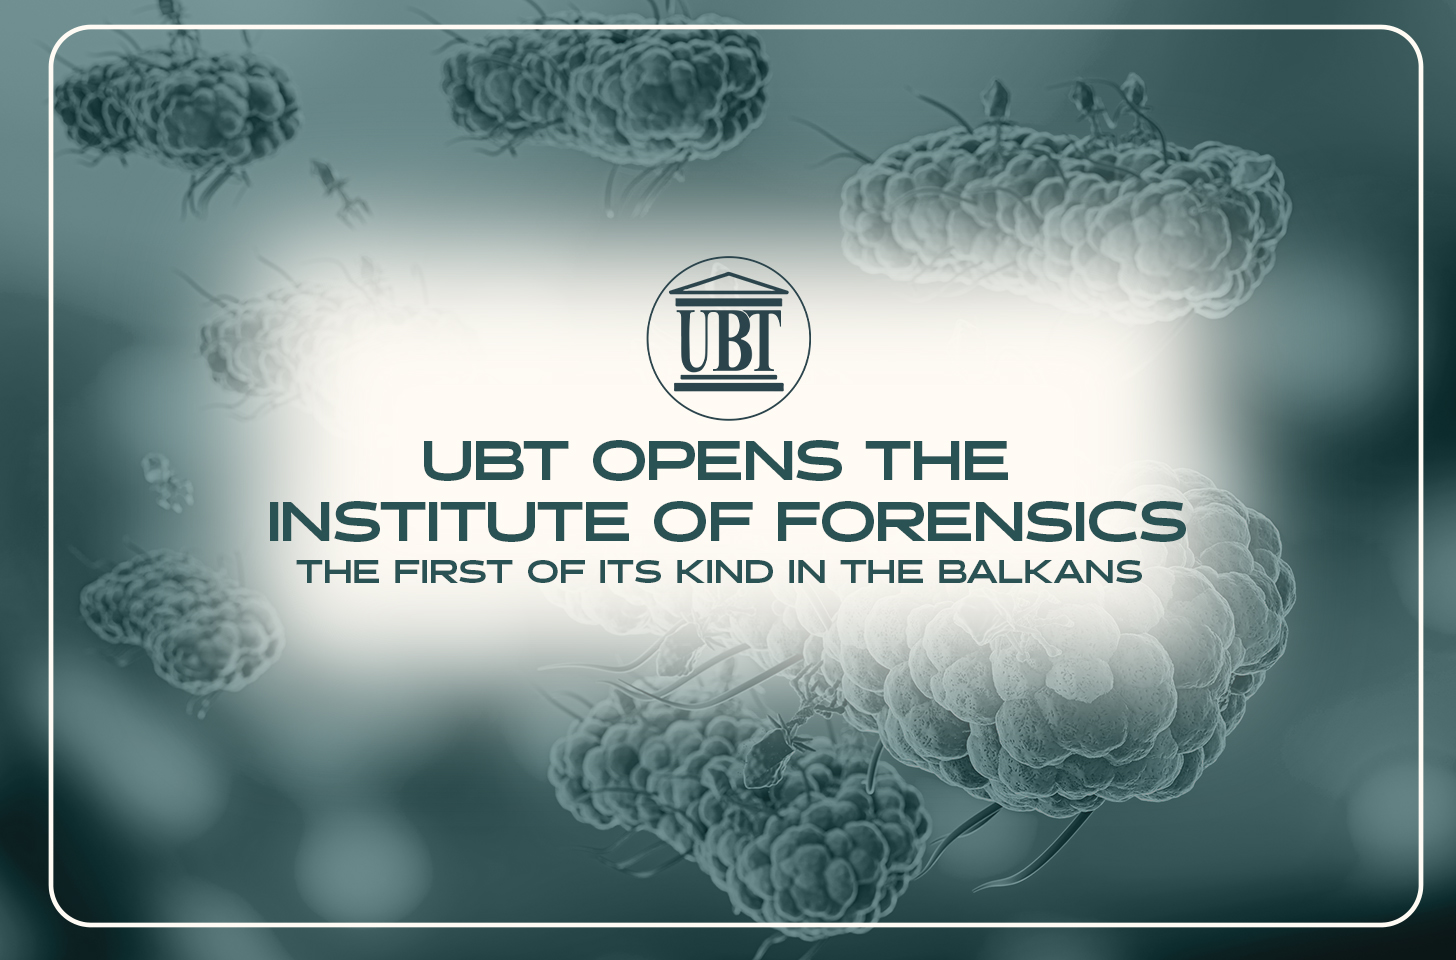 UBT opens the Institute of Forensic Sciences – one of the first institutes of this kind in the Balkans